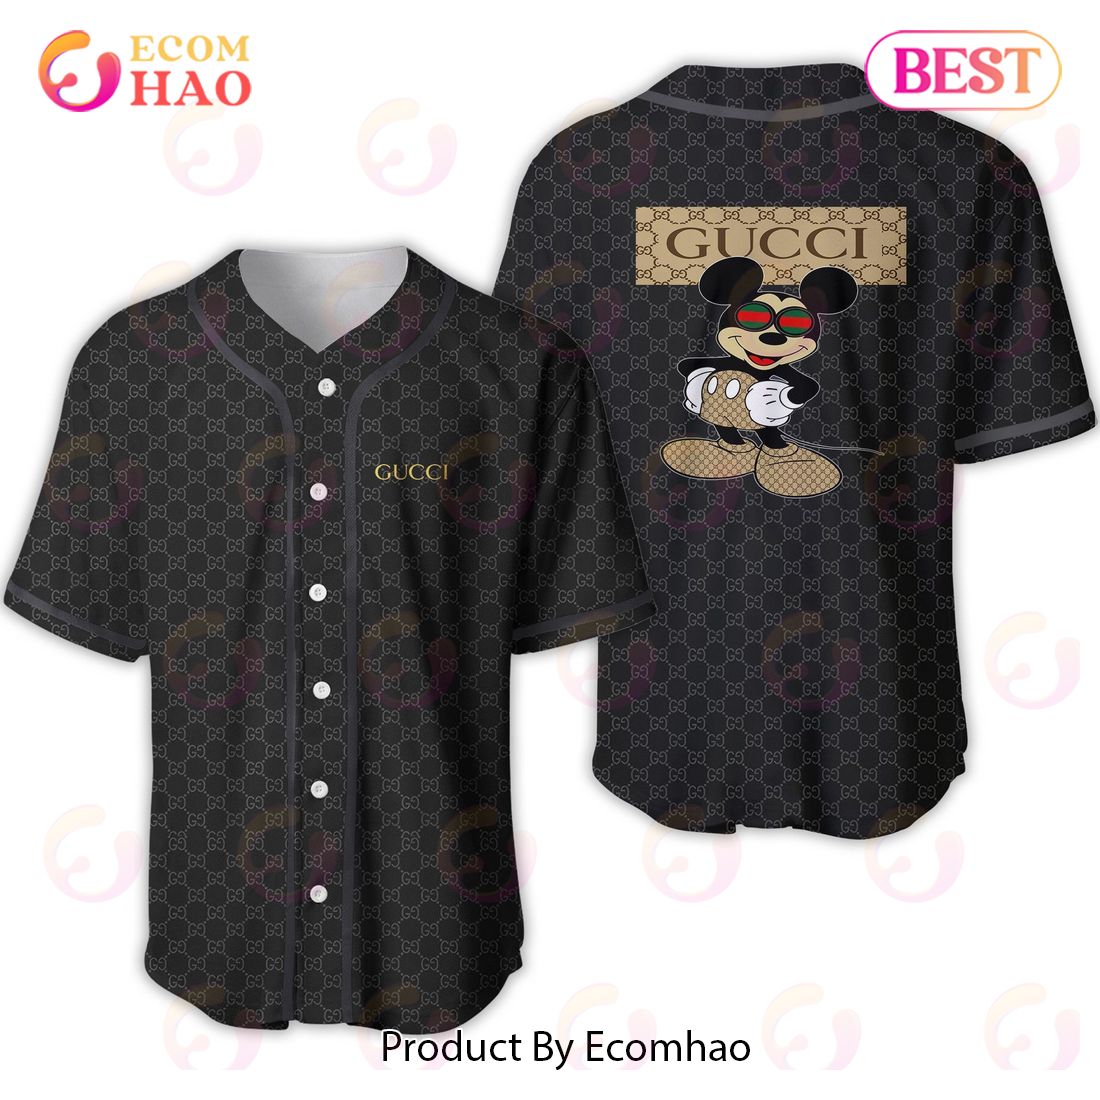 Gucci Black MPrinting Brown Mickey Mouse Luxury Brand Jersey Limited Edition